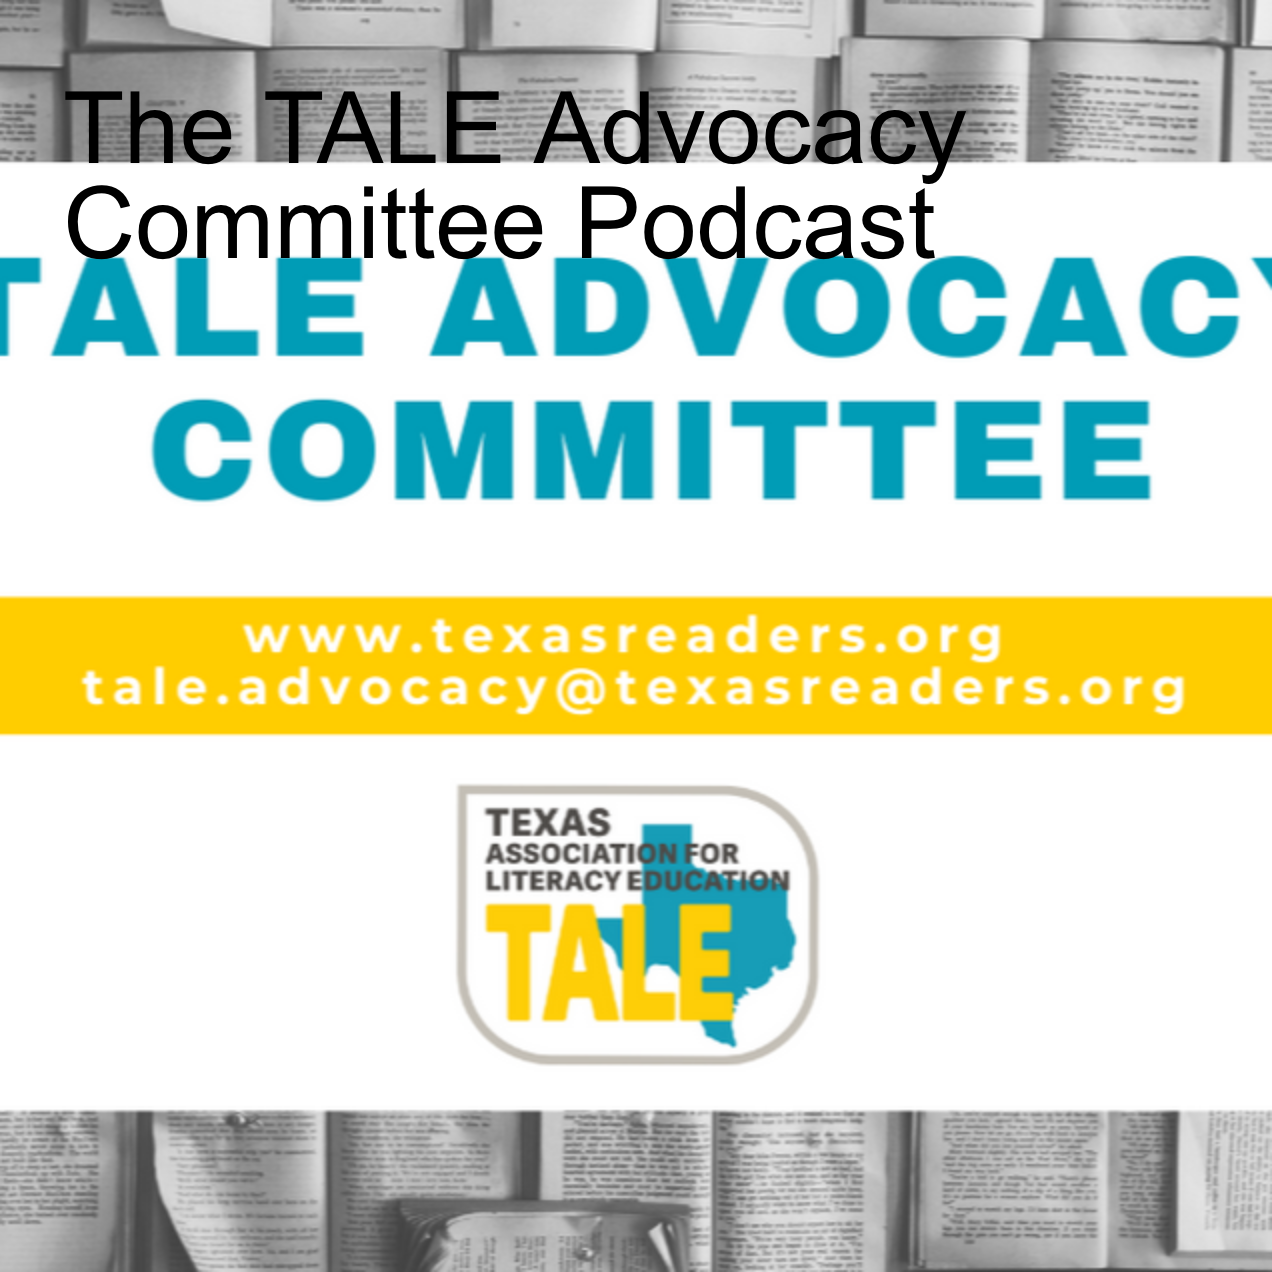 The TALE Advocacy Committee Podcast